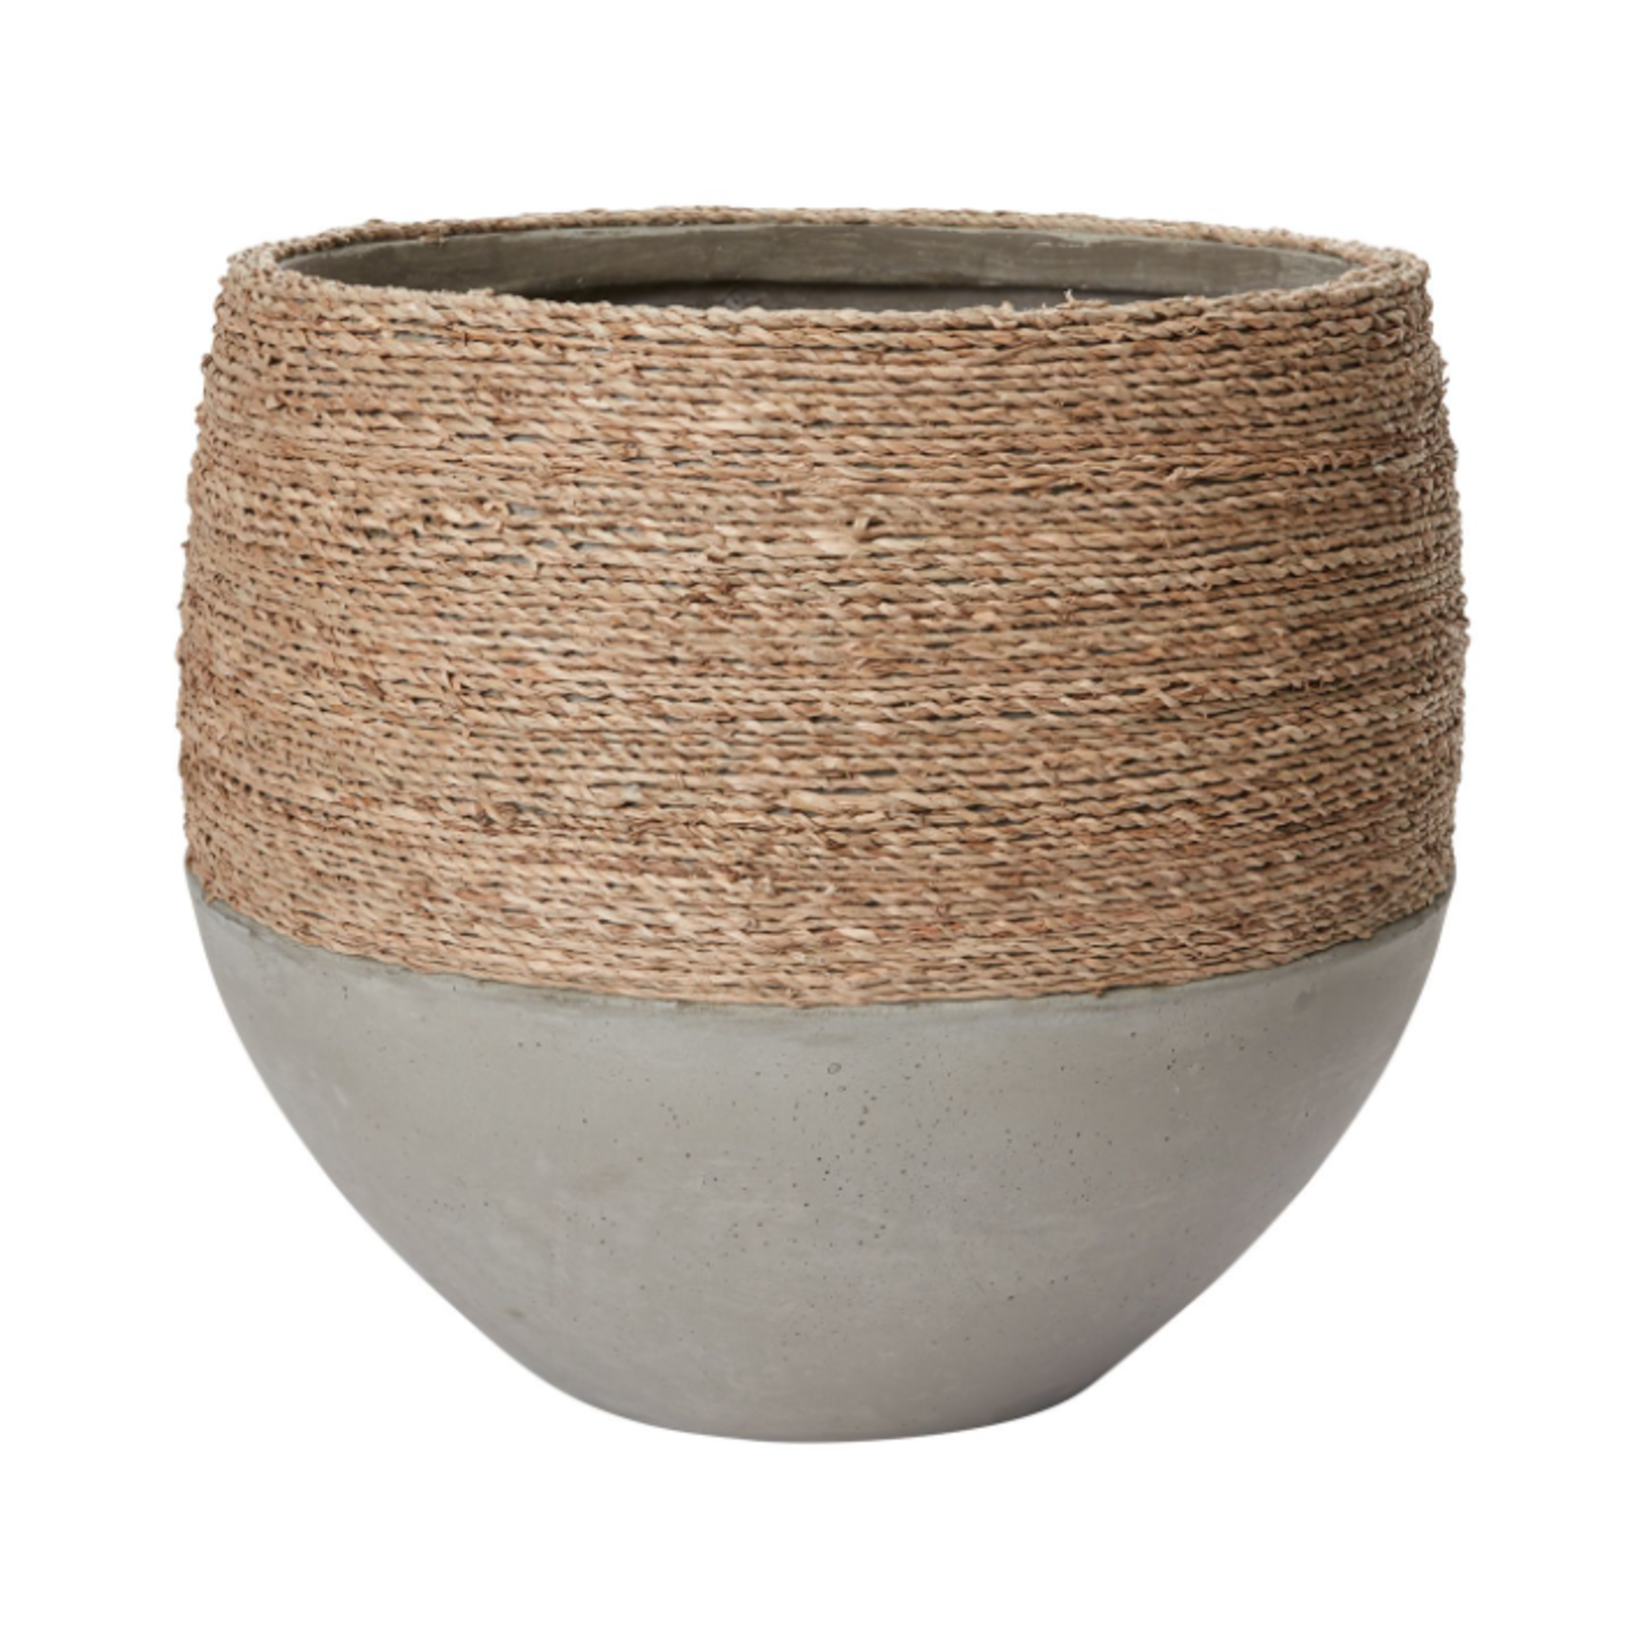 14.5”h x 15” CONCRETE REED POT WITH NATURAL ROPE